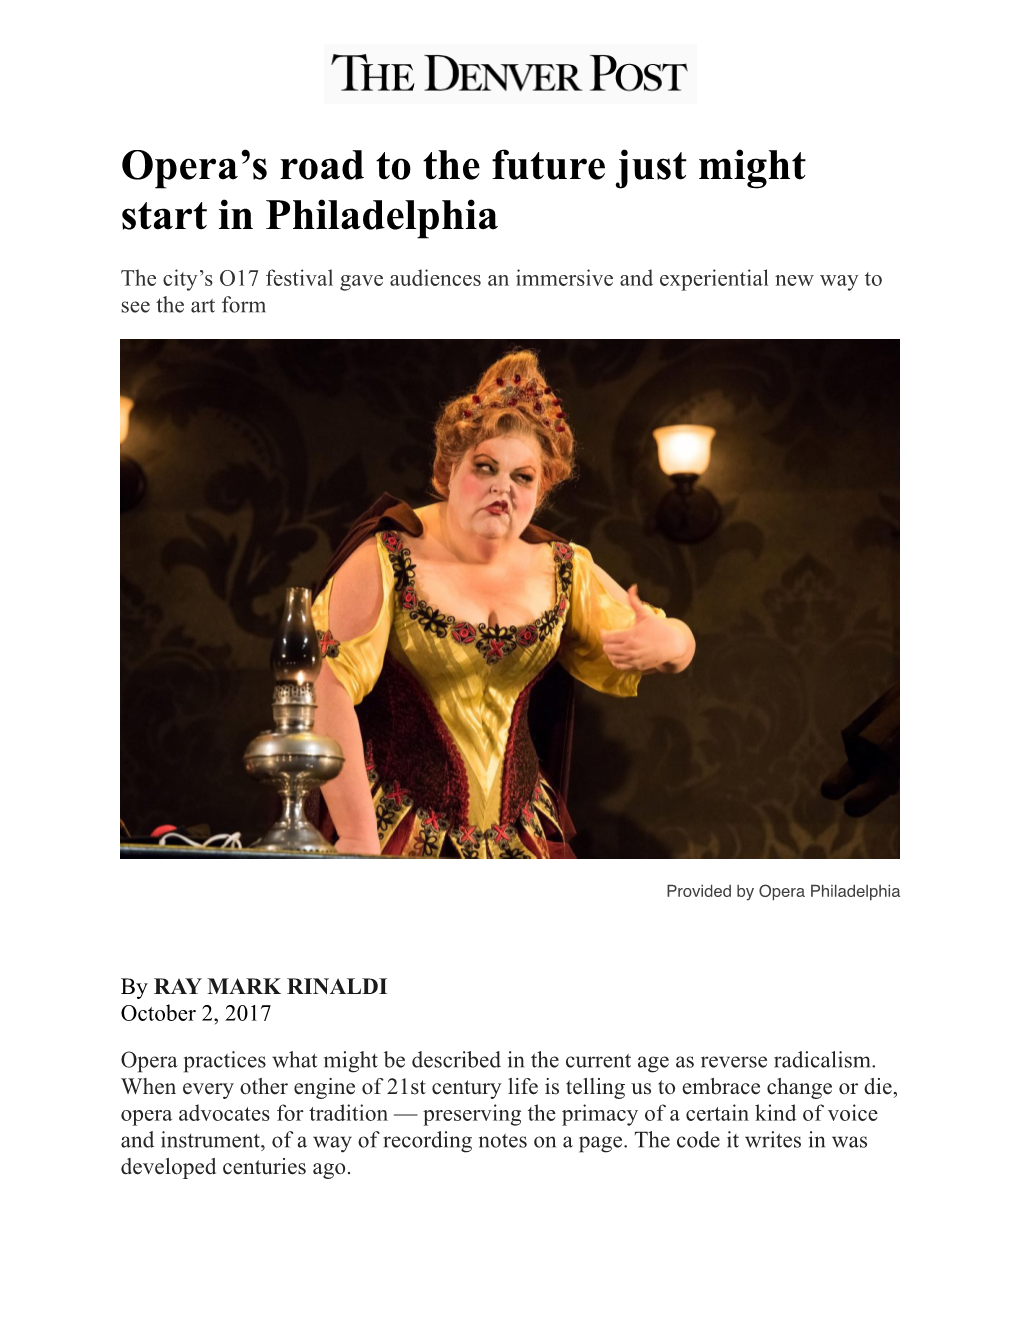 Opera's Road to the Future Just Might Start in Philadelphia